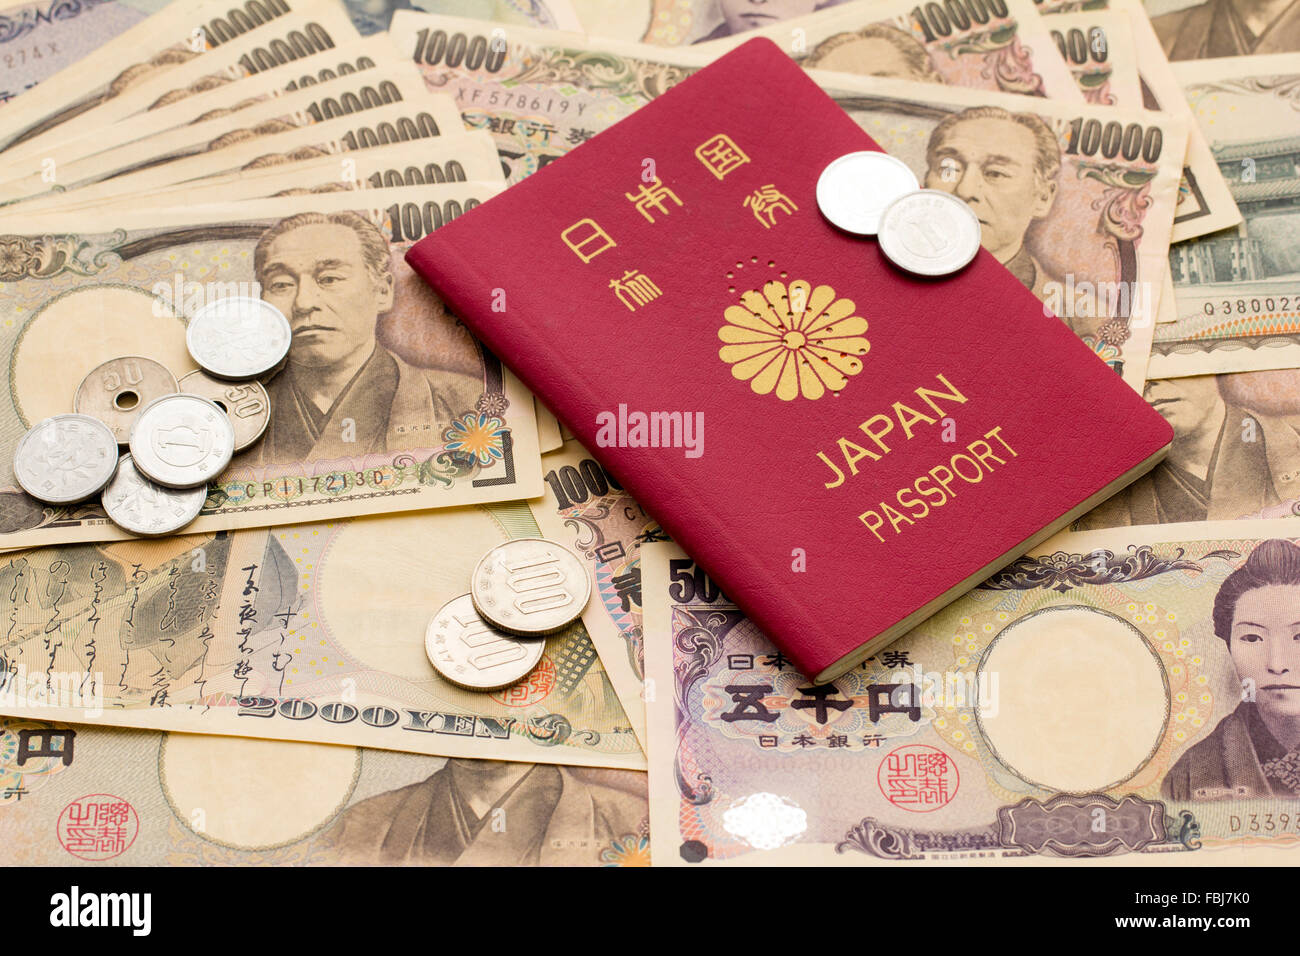 Travel, money and currency. Red Japanese passport on top of scattered various domination Japanese yen banknotes and some small change, coins, on top. Stock Photo